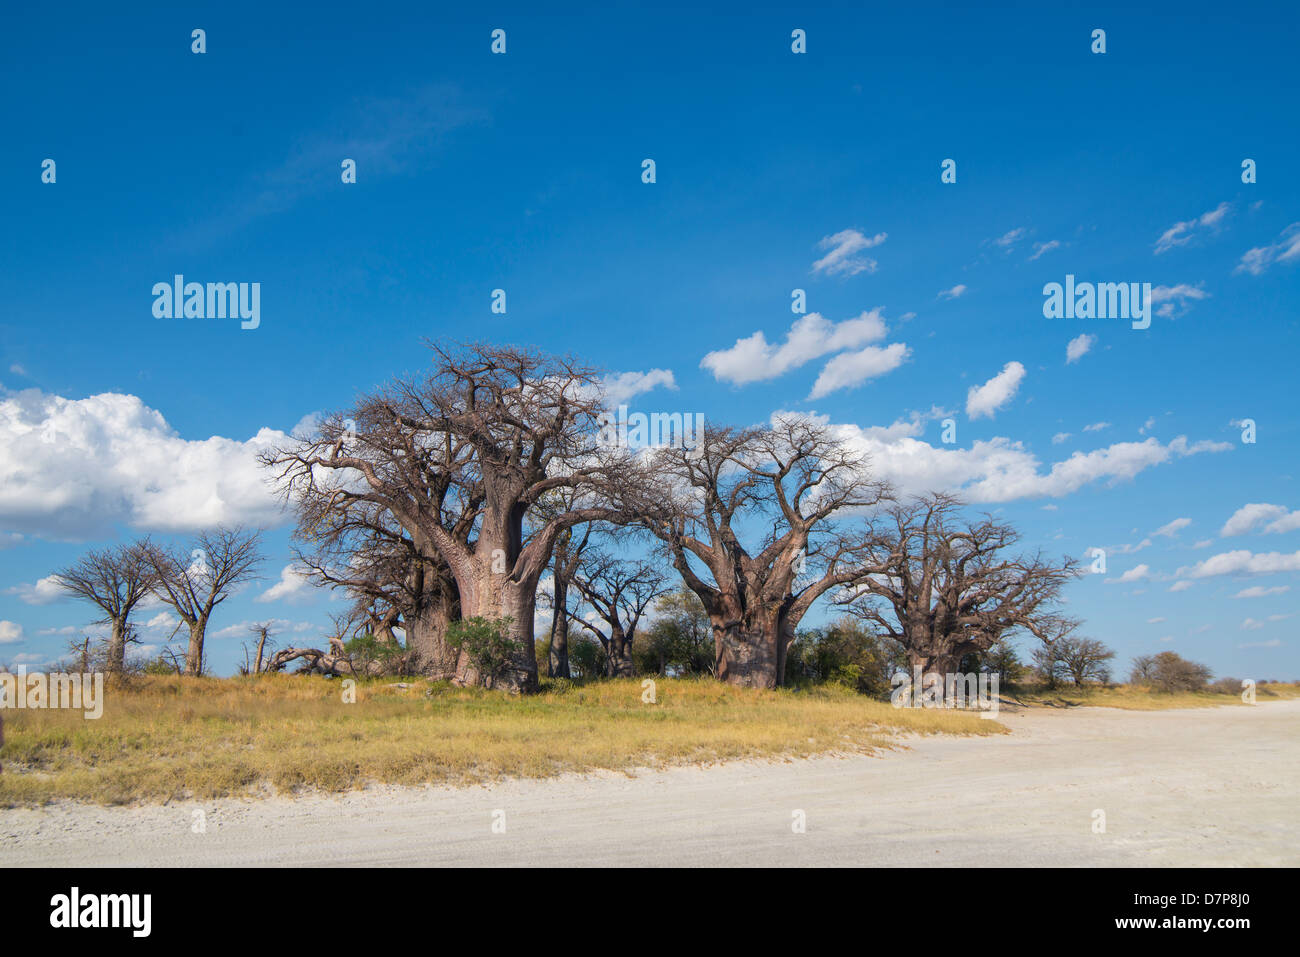 Baines Baobab trees on the edge of a Salt Pan in Africa, tree of life Stock Photo